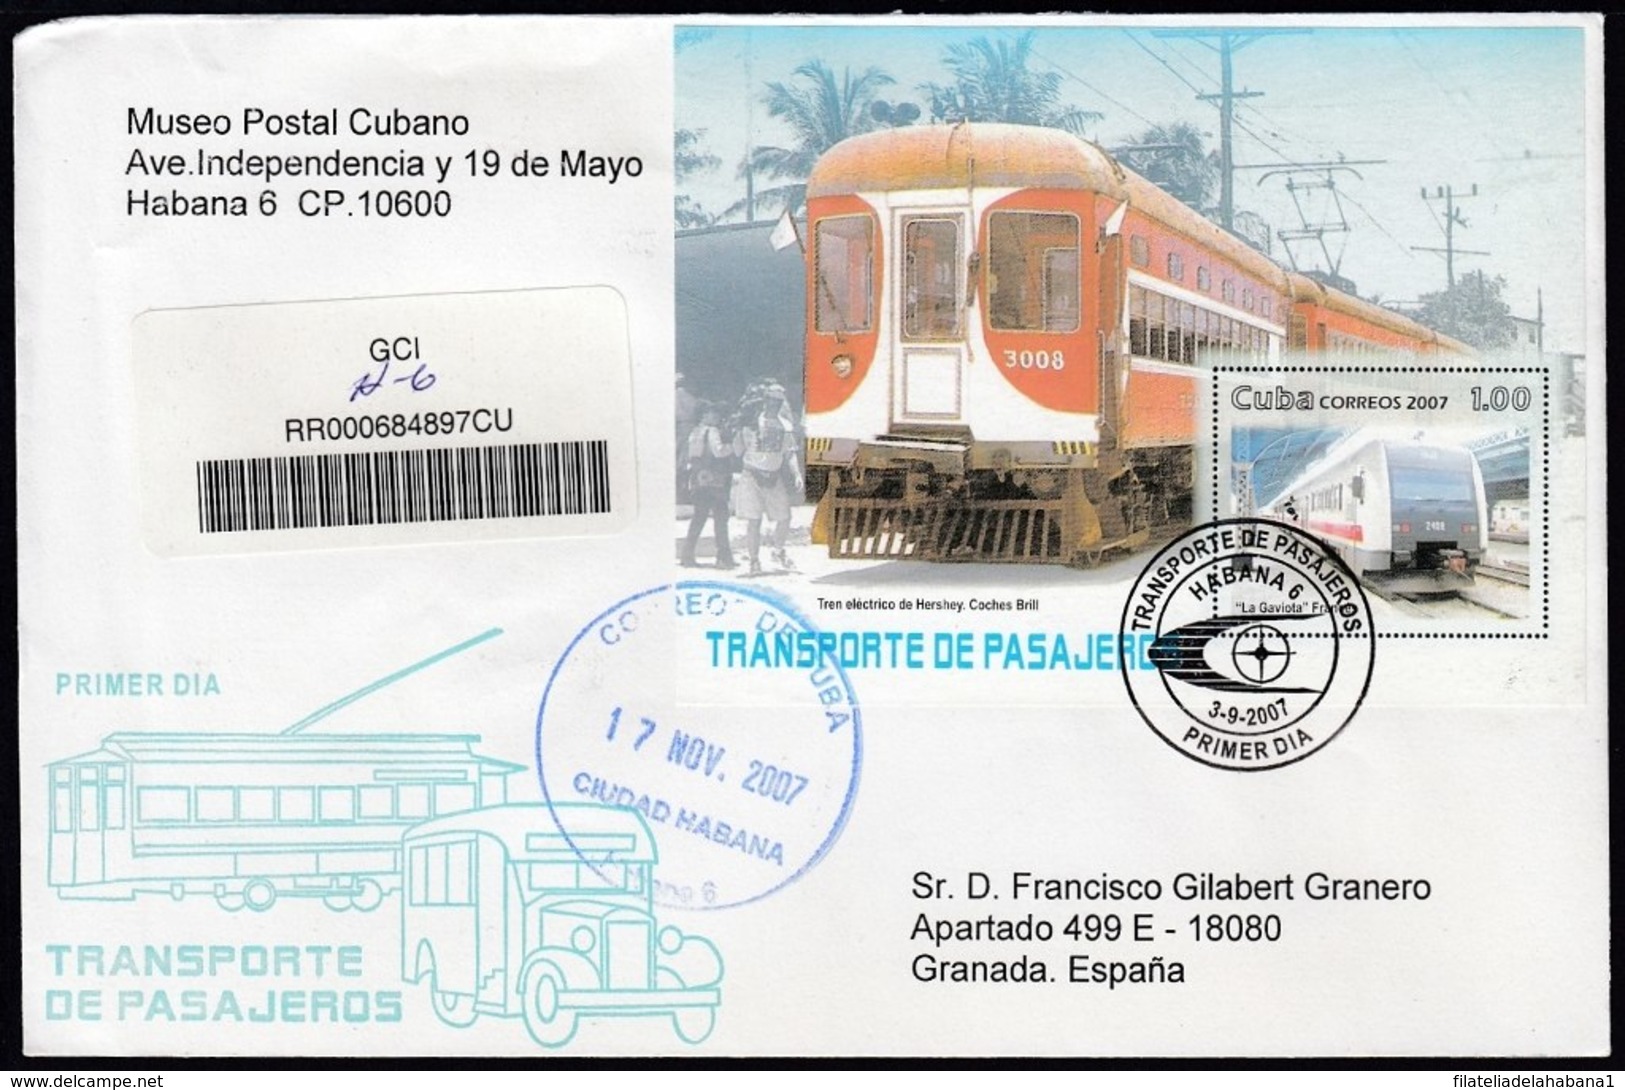 2007-FDC-118 CUBA FDC 2007. REGISTERED COVER TO SPAIN. TRANSPORTE PASAJEROS, TAXI, COCOTAXI, BUS, OMNIBUS, RAILROAD. - FDC